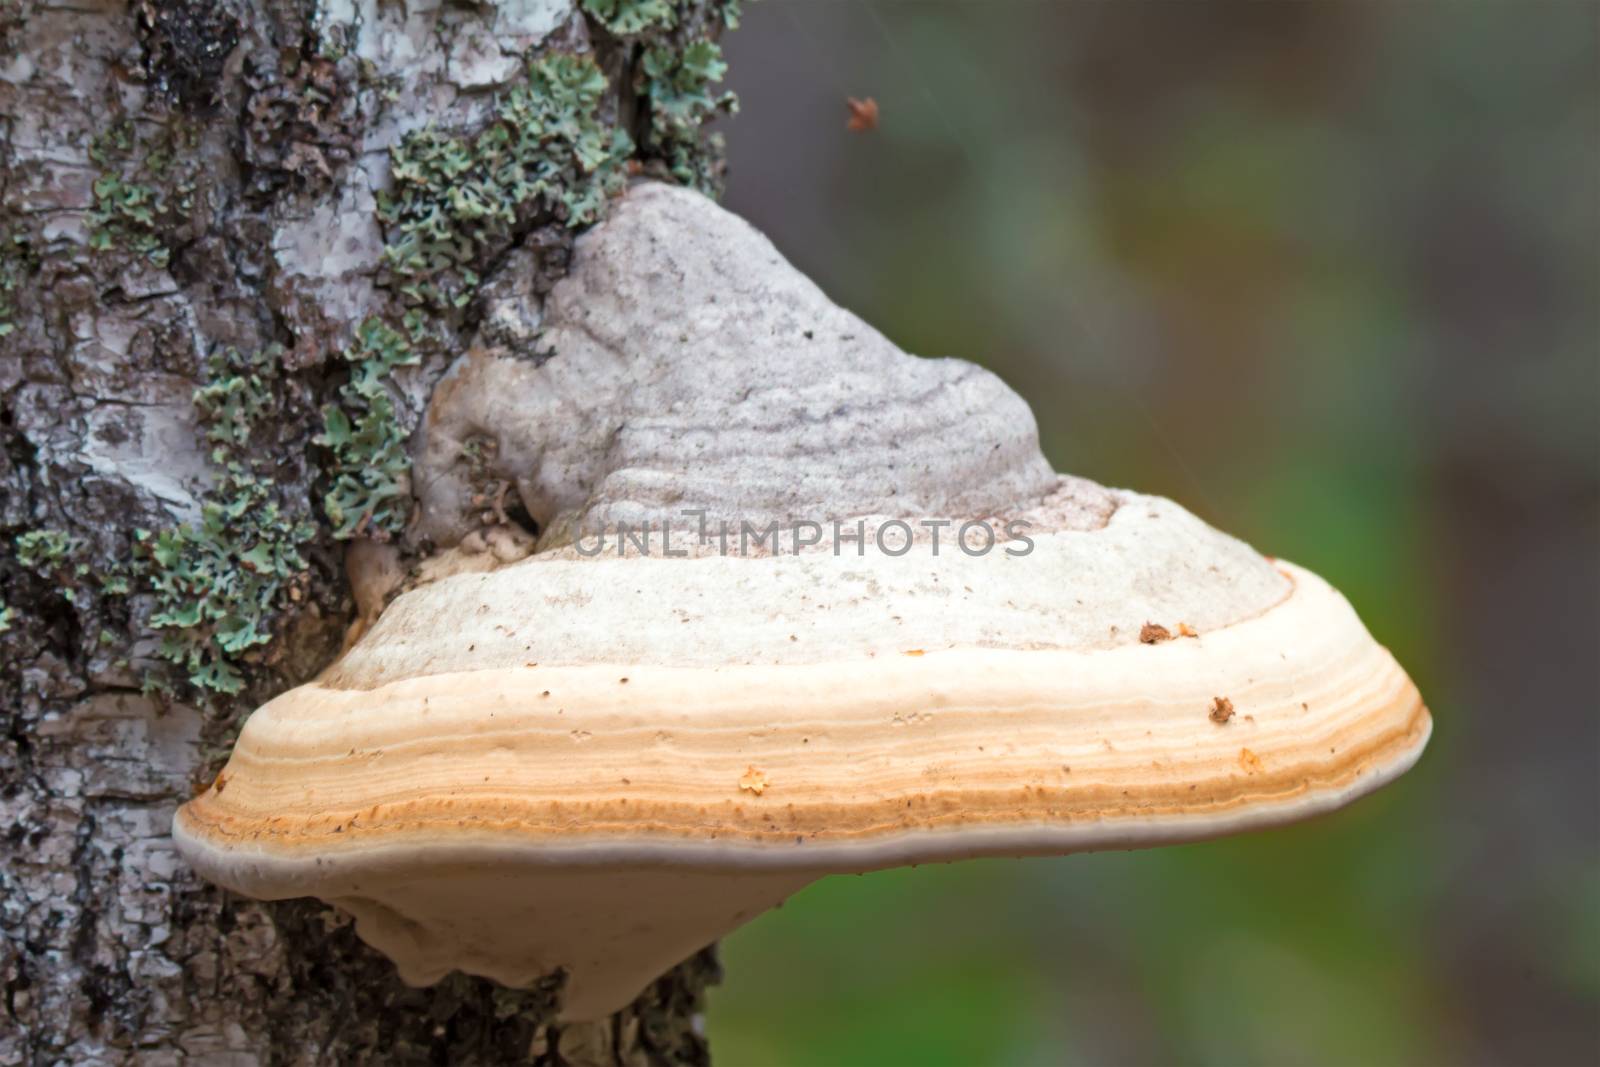 On the birch trunk, covered with moss growing large white mushroom chaga.